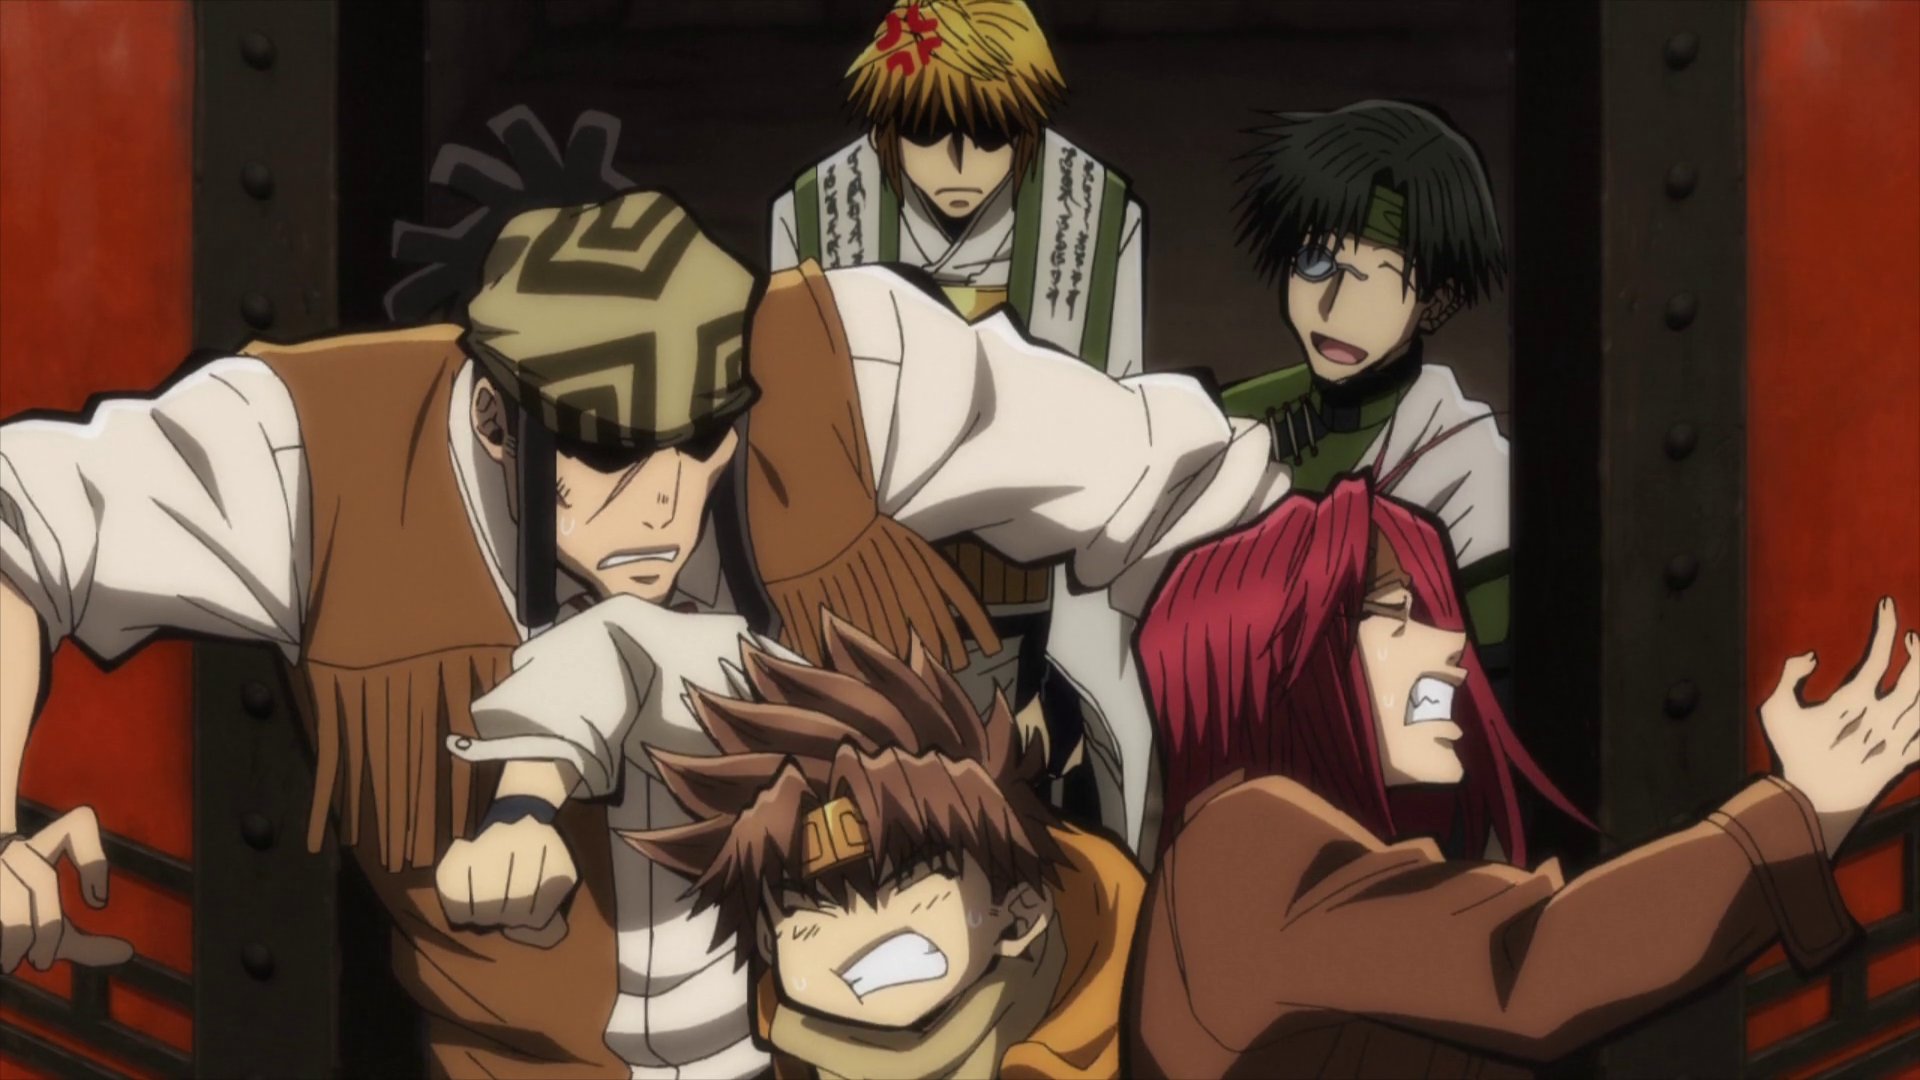 Seiten Taisei - (Saiyuki Centric News) 2 of Saiyuki Zeroin had some amazing expressions. The anime style fits really well for some of the funnier scenes!